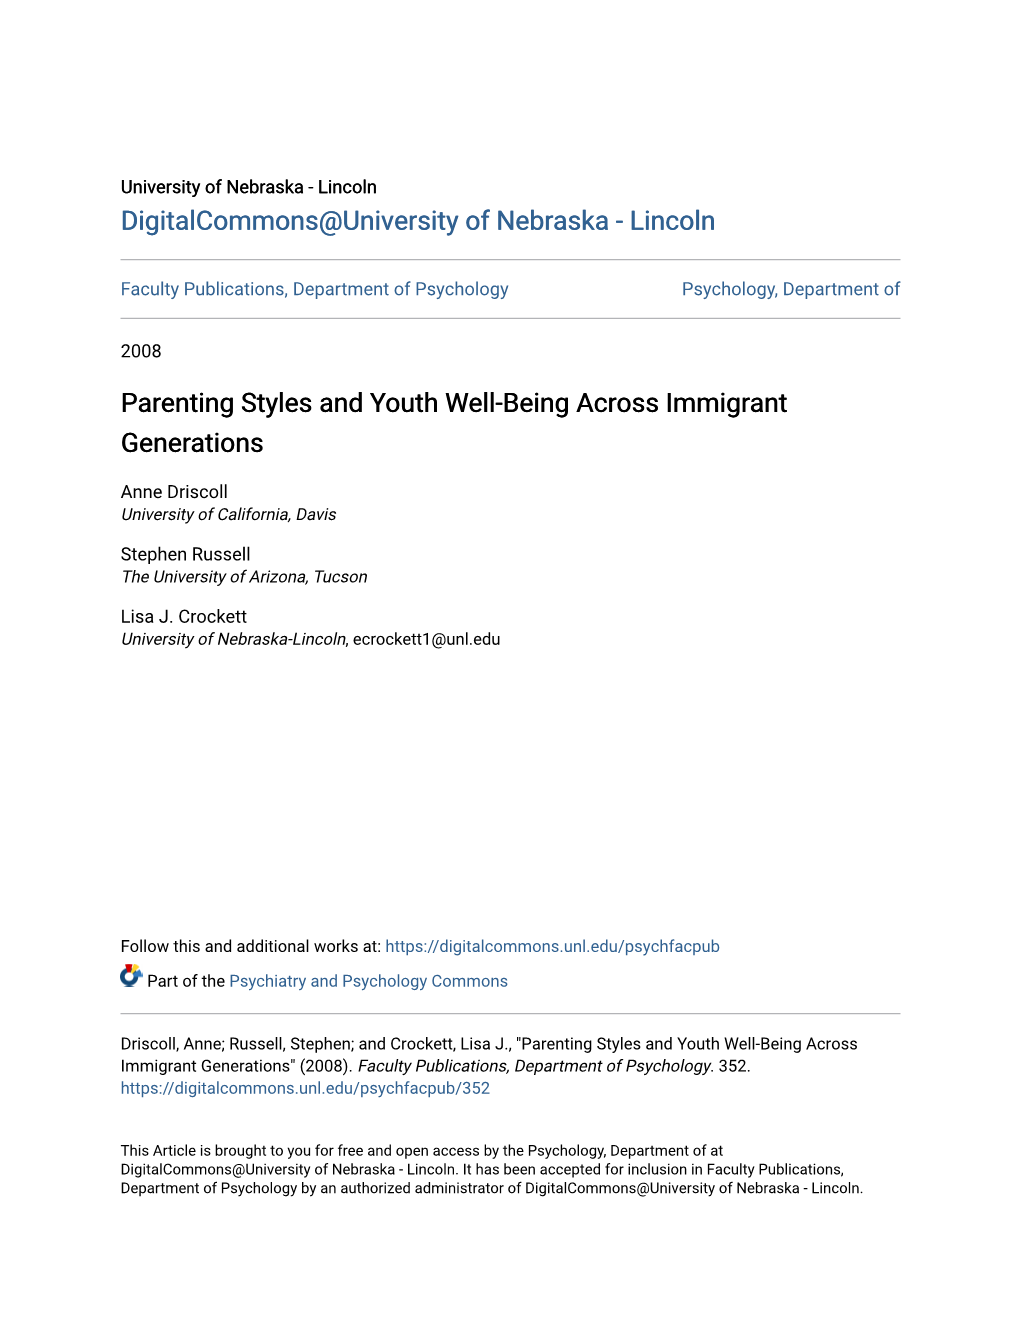 Parenting Styles and Youth Well-Being Across Immigrant Generations